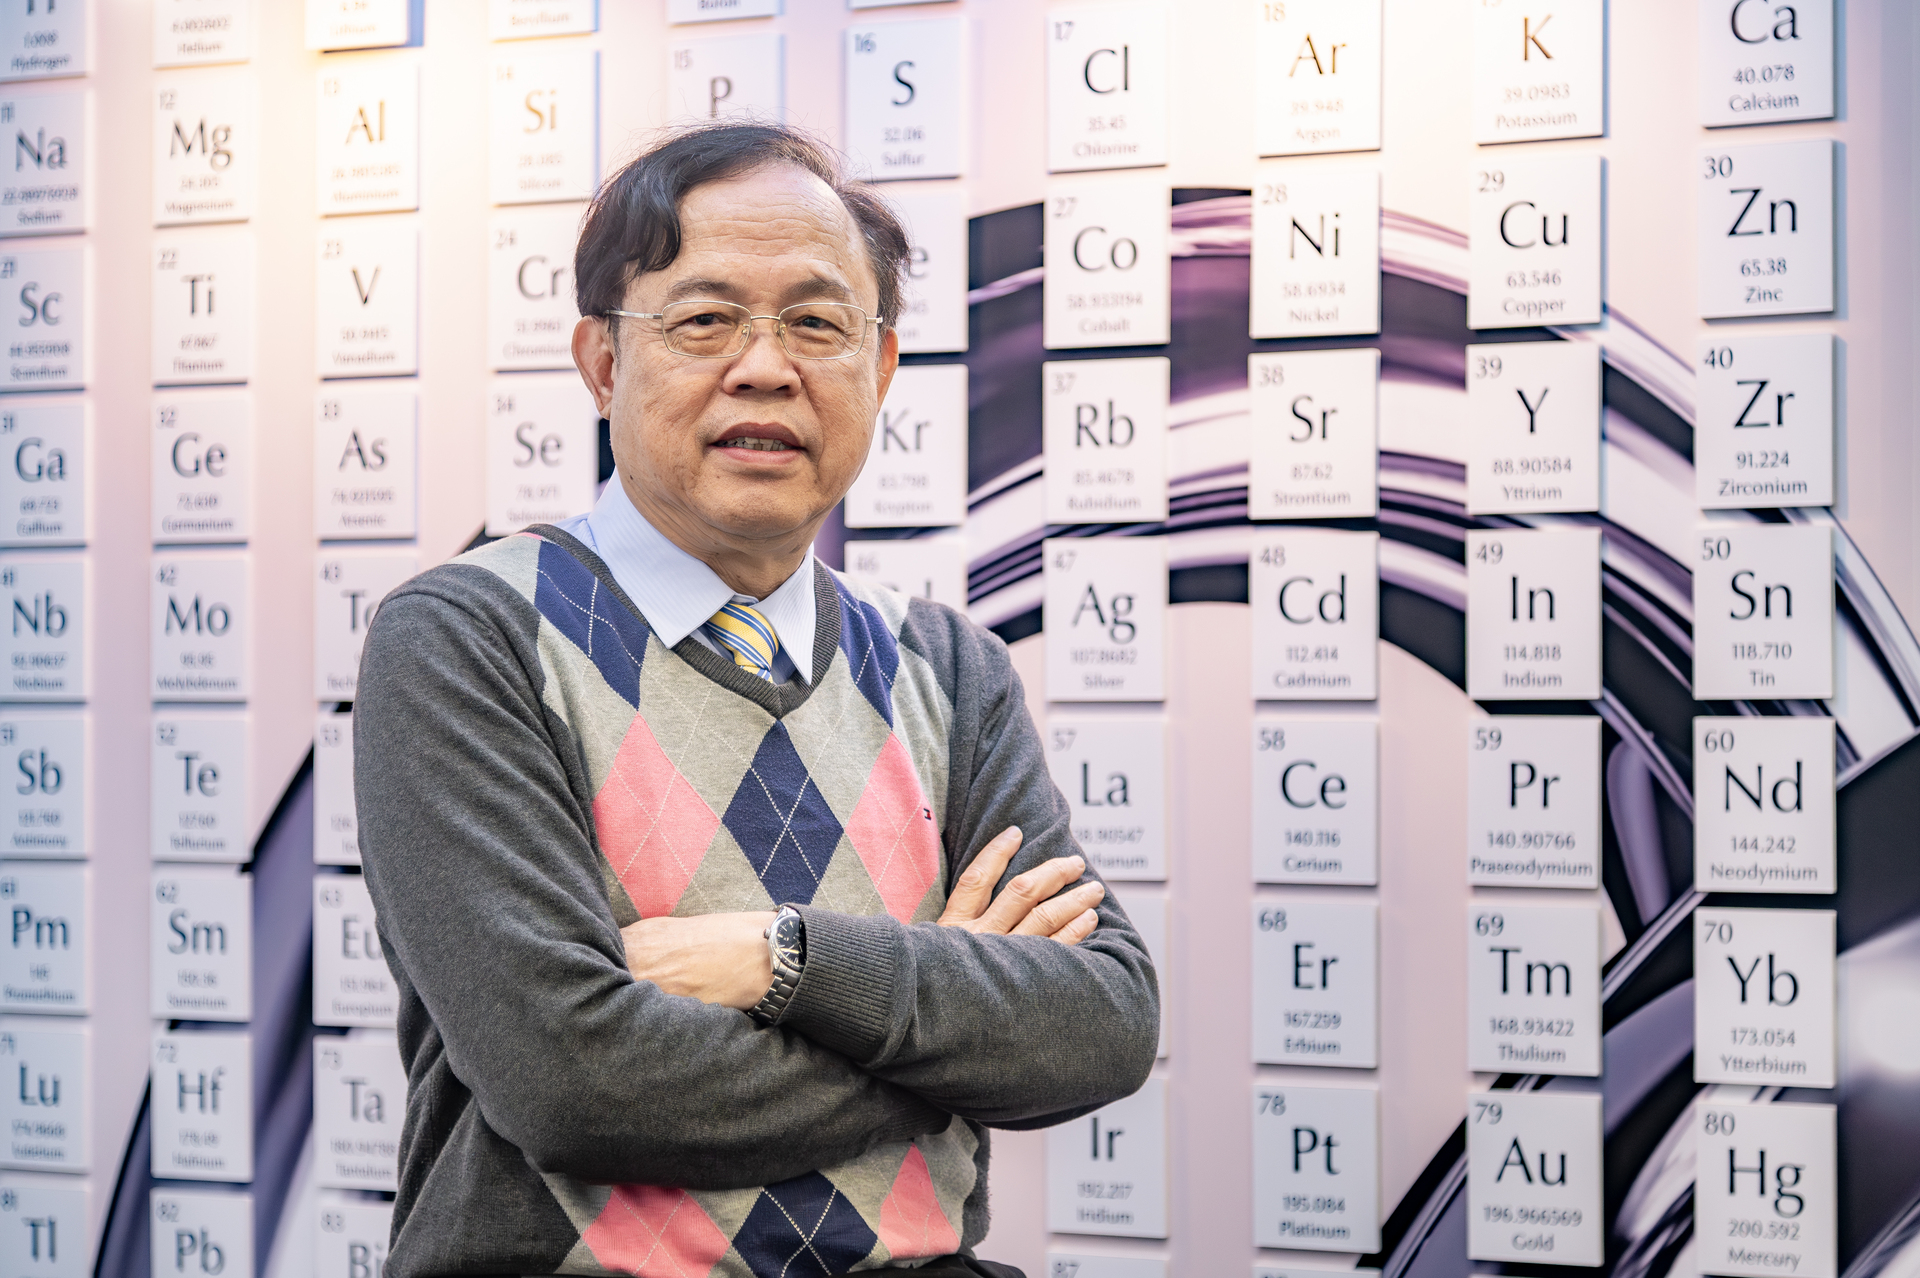 Chair Professor Jien-Wei Yeh (葉均蔚) from NTHU's Materials Science and Engineering pioneered a groundbreaking field known as “Metal Mixology.”